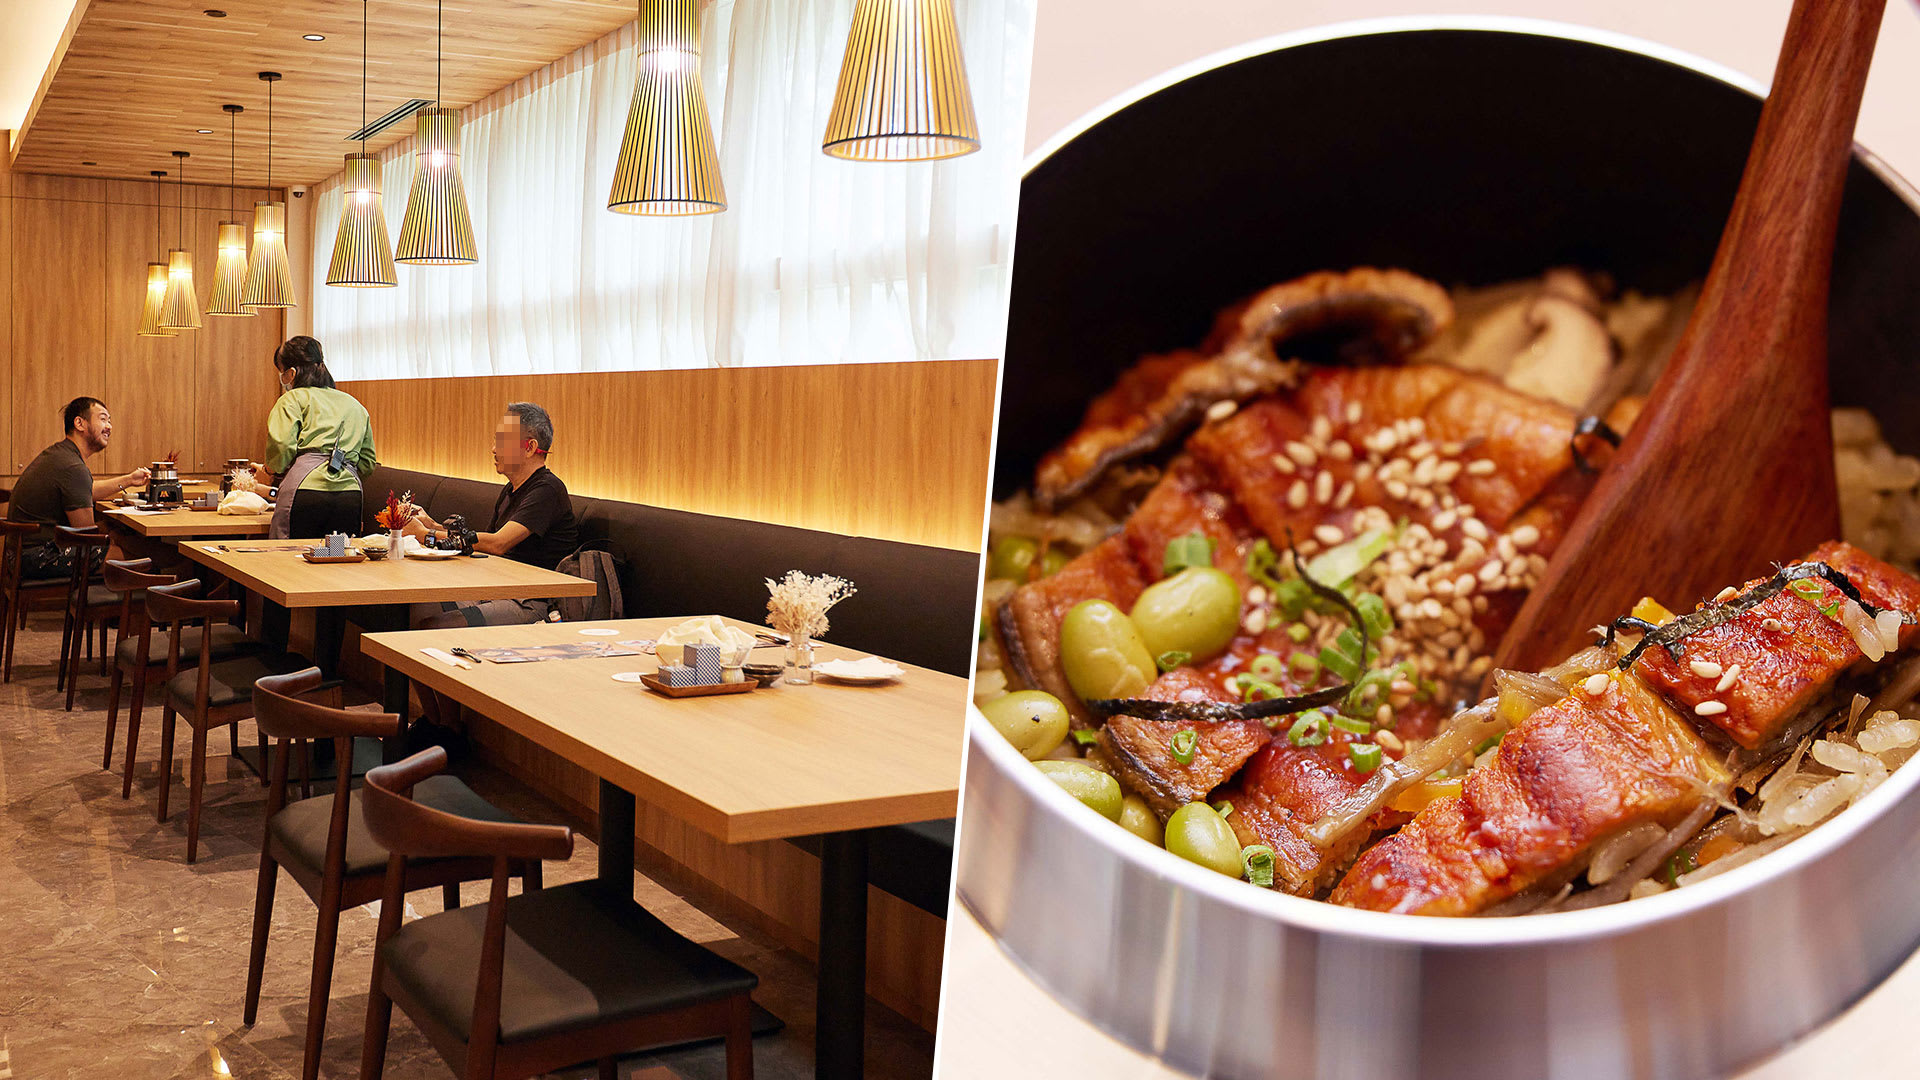 New Kamameshi Restaurant Requires You To Wait 18 Mins For Rice To Cook At Your Table